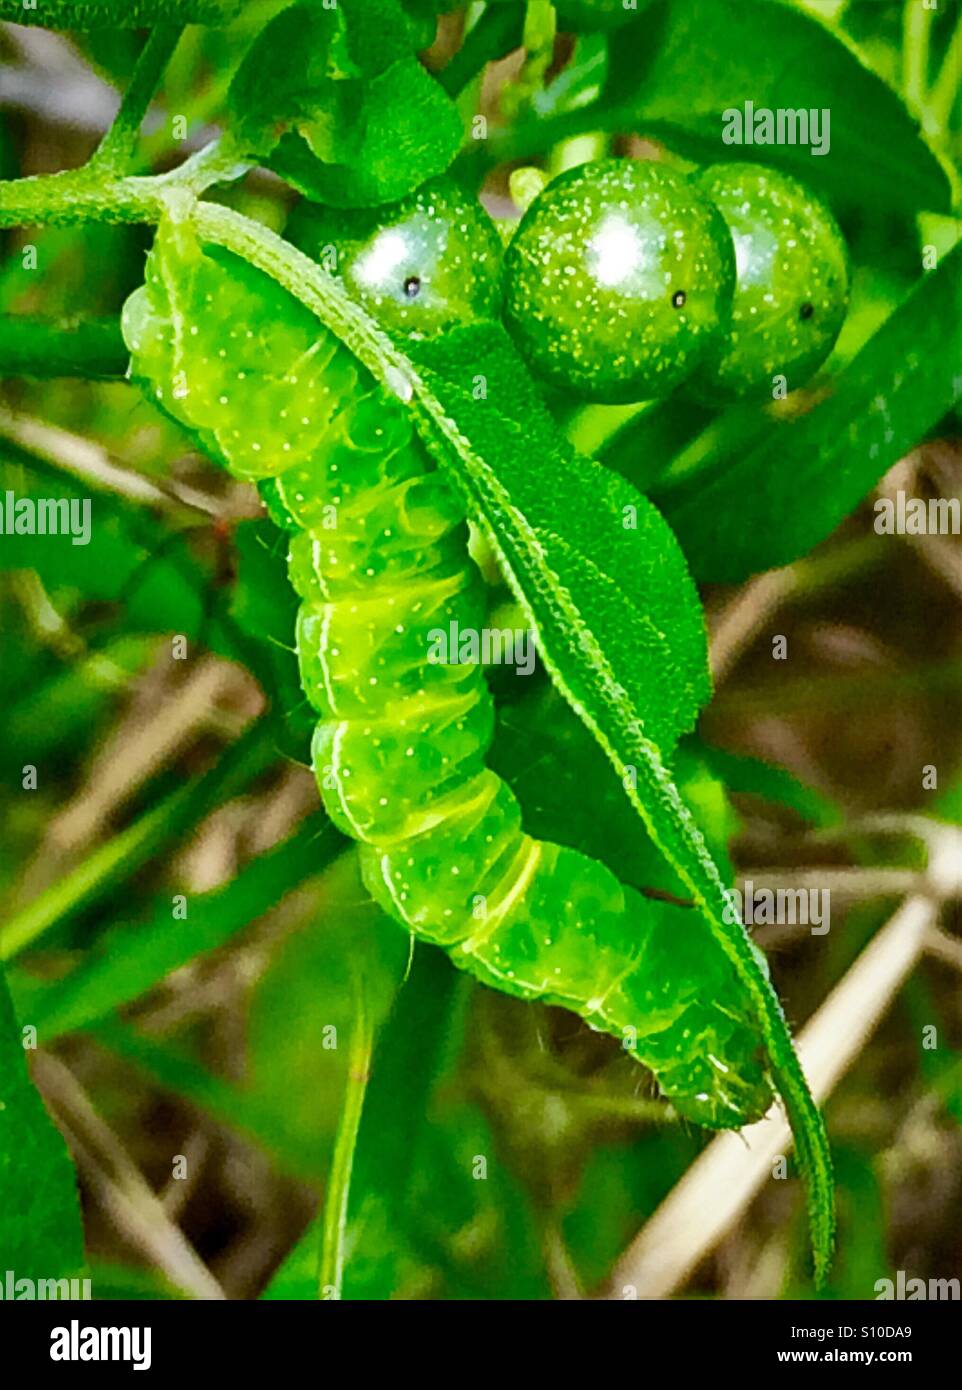 A vibrant green Cabbage Looper caterpillar munches on leaves, Trichopulsia ni Stock Photo